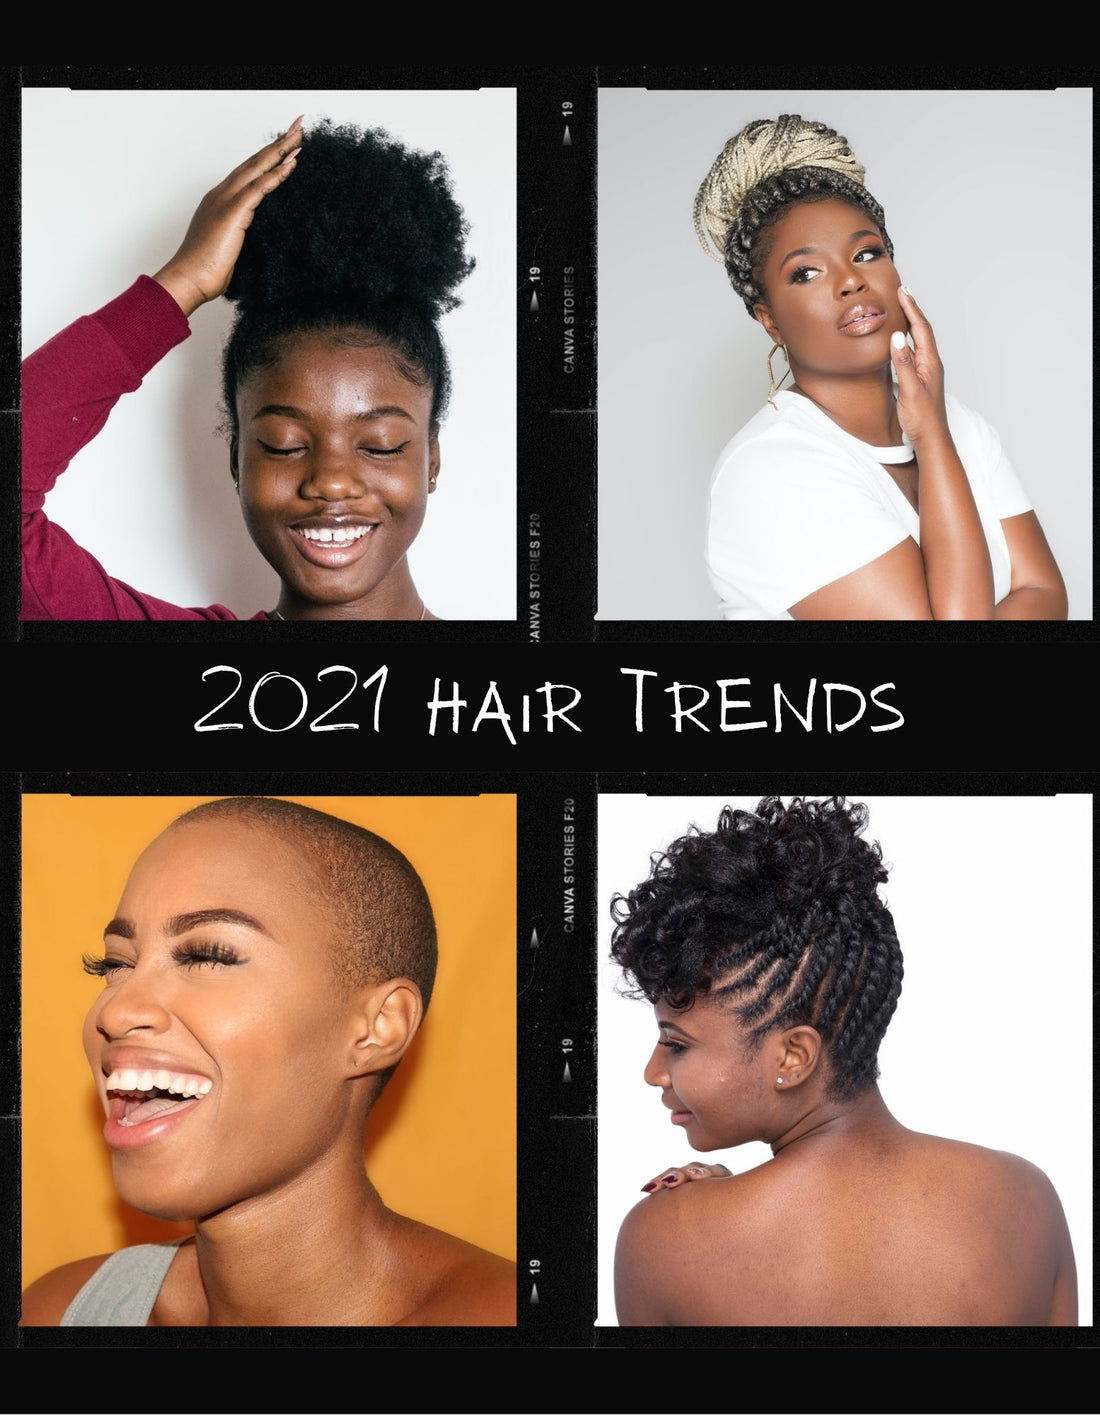 Top 5 Natural Hairstyles for Black Women in 2021